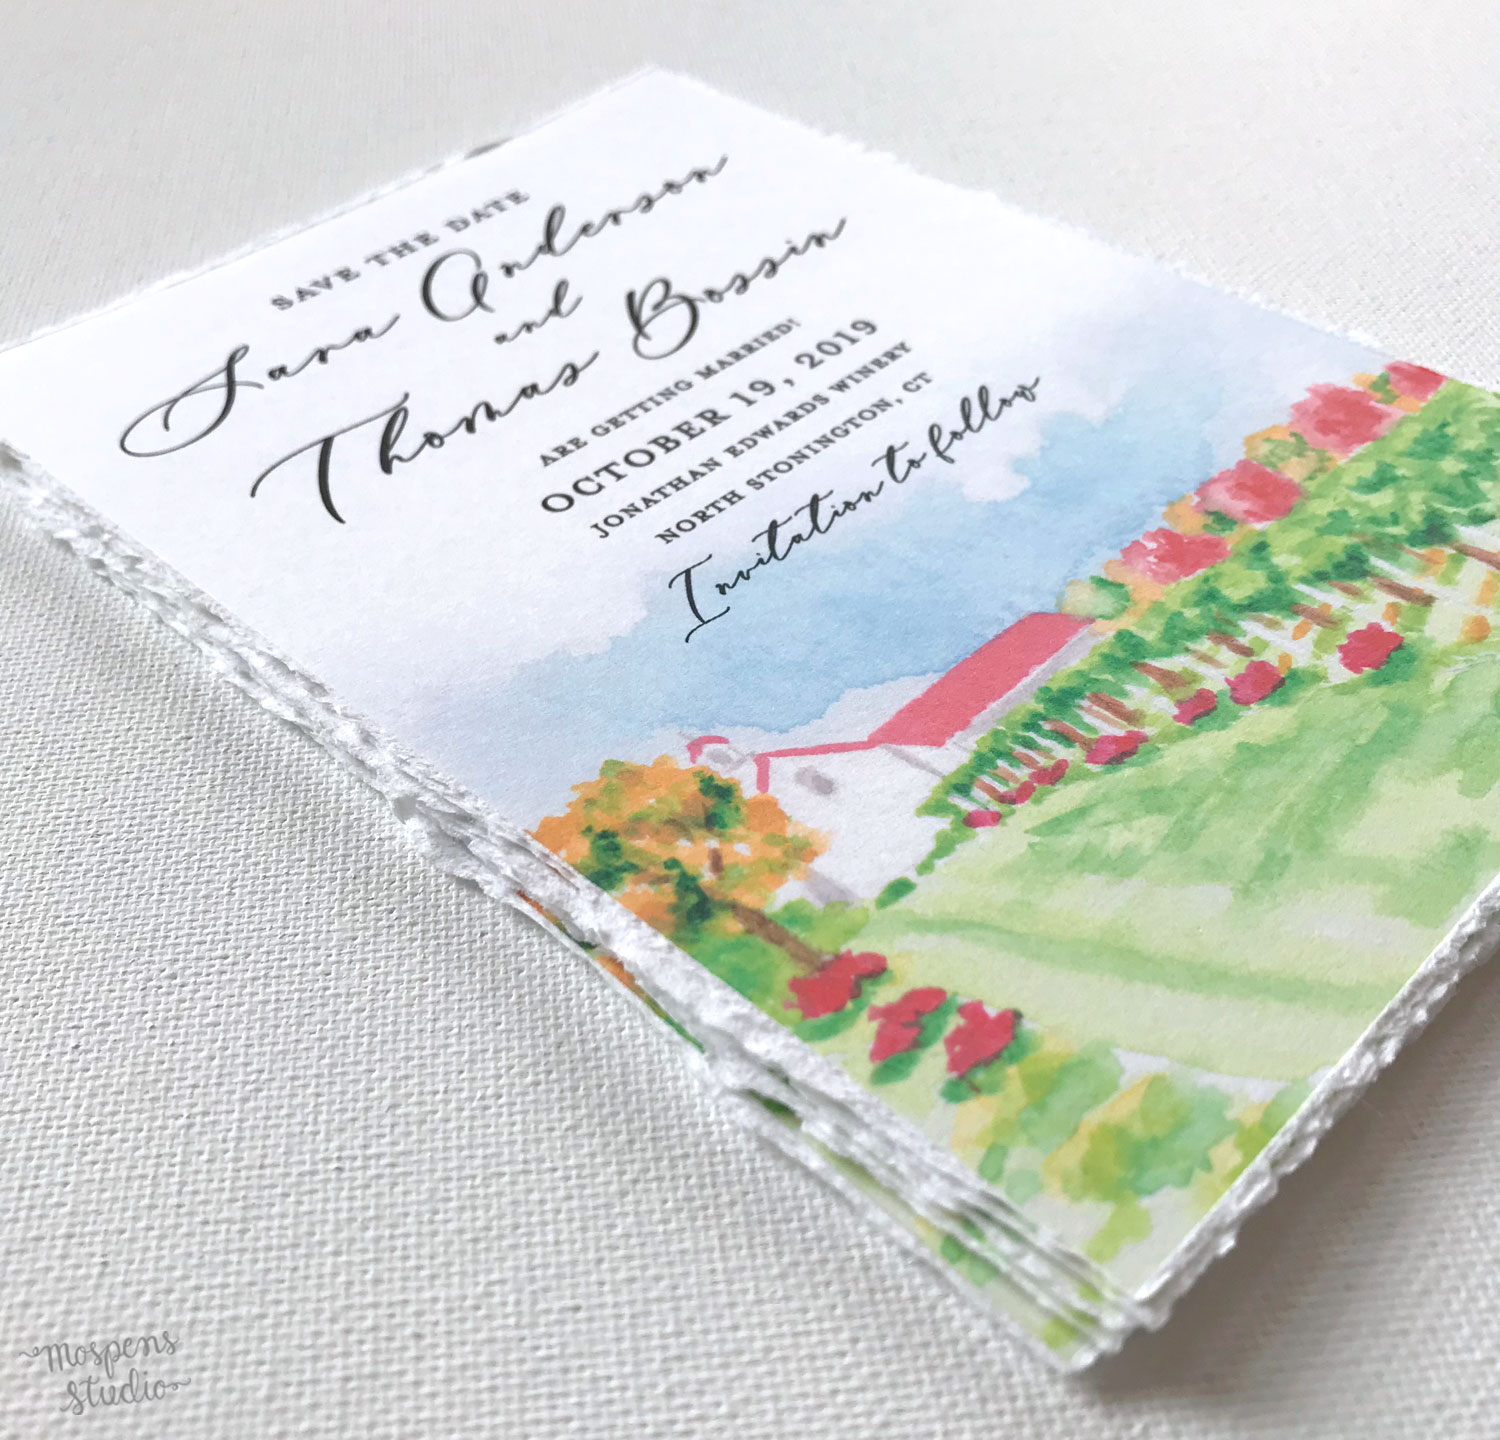 Watercolor winery save the date cards venue illustration by Michelle Mospens. Mospens Studio